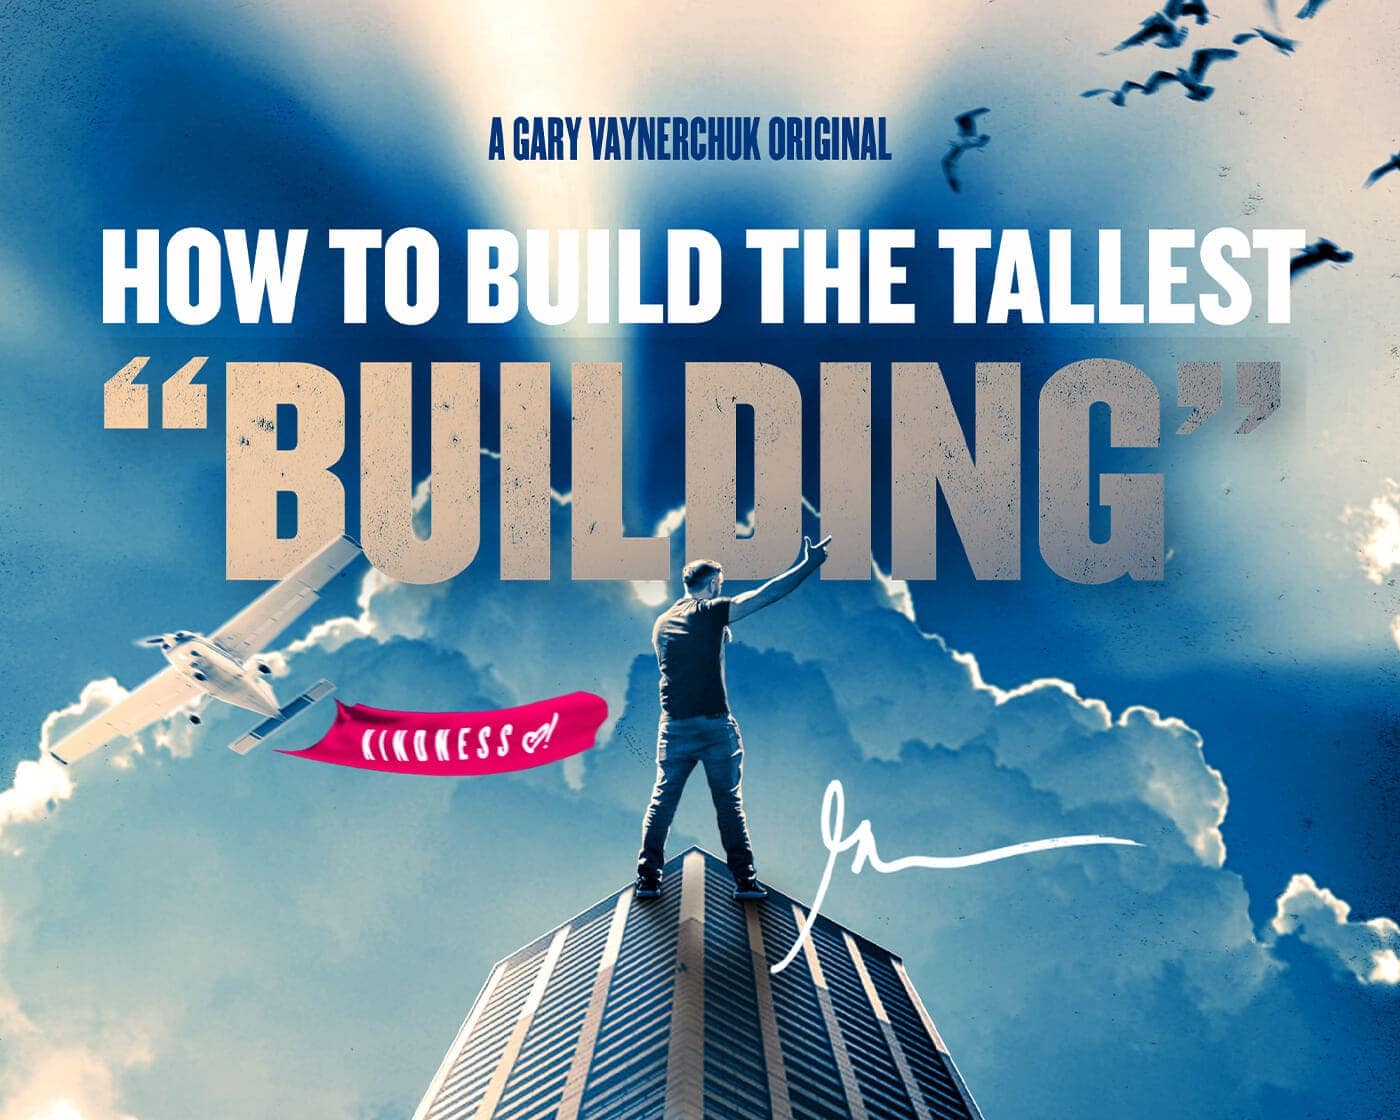 How To Build The Tallest Building